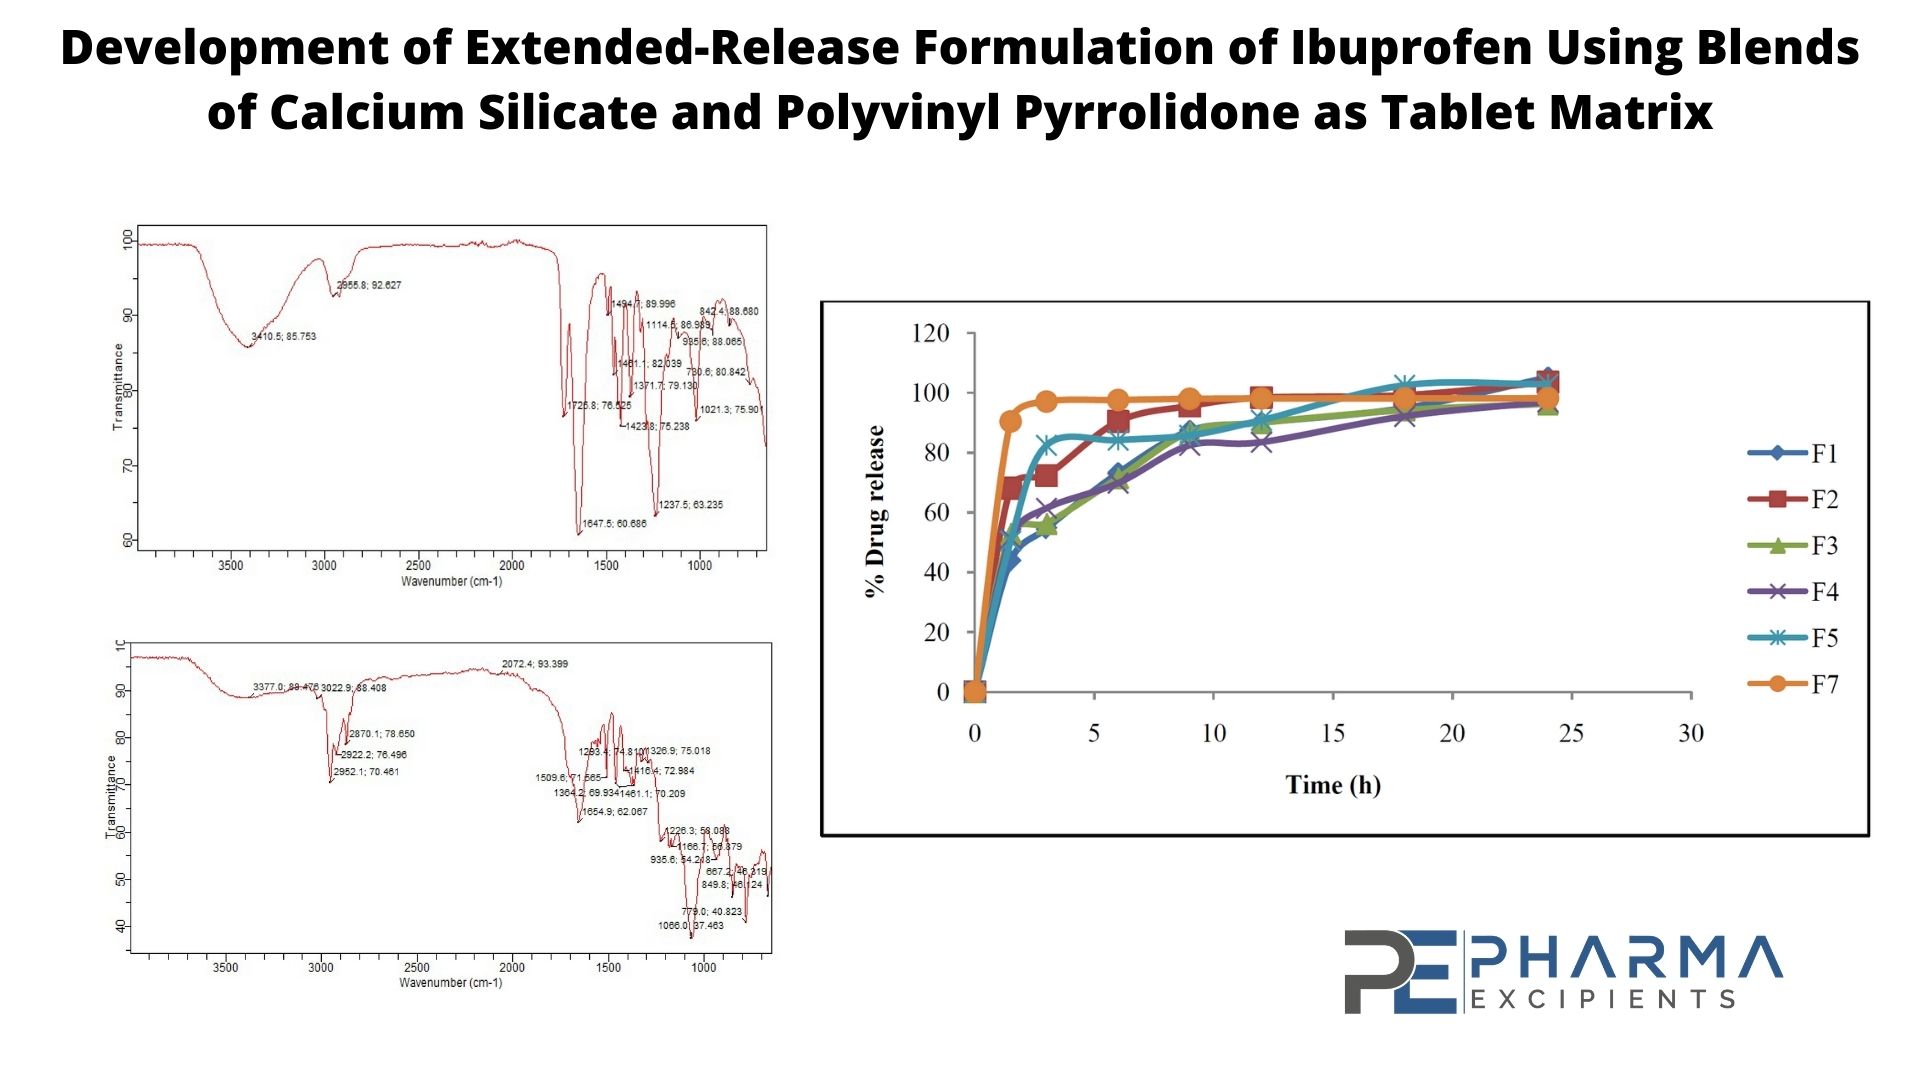 graphical abstract of Development of Extended-Release Formulation of Ibuprofen Using Blends of Calcium Silicate and Polyvinyl Pyrrolidone as Tablet Matrix